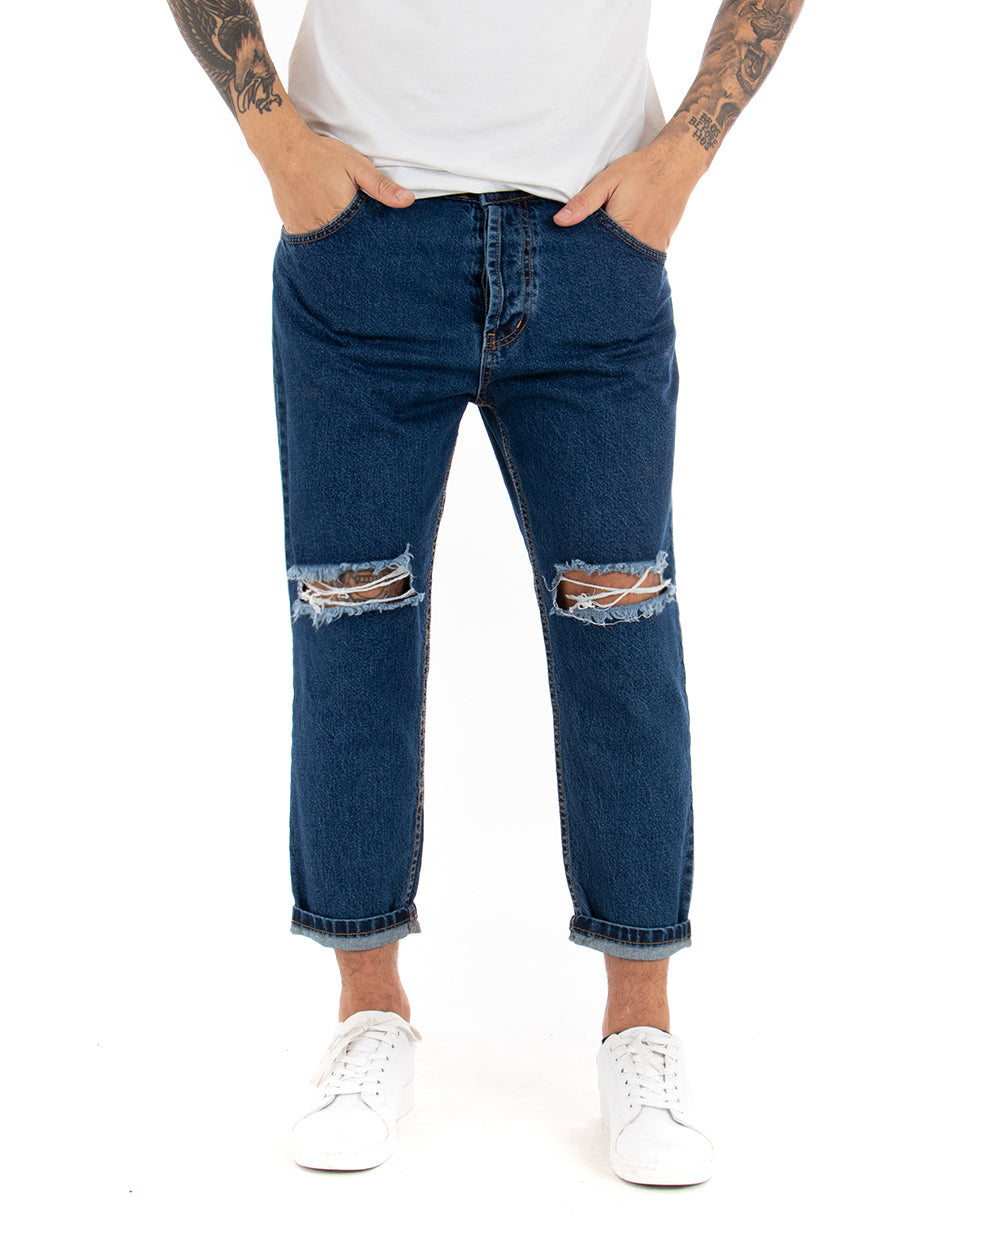 Men's Jeans Trousers Loose Fit Denim Knee Cut Five Pockets Casual GIOSAL-P3019A